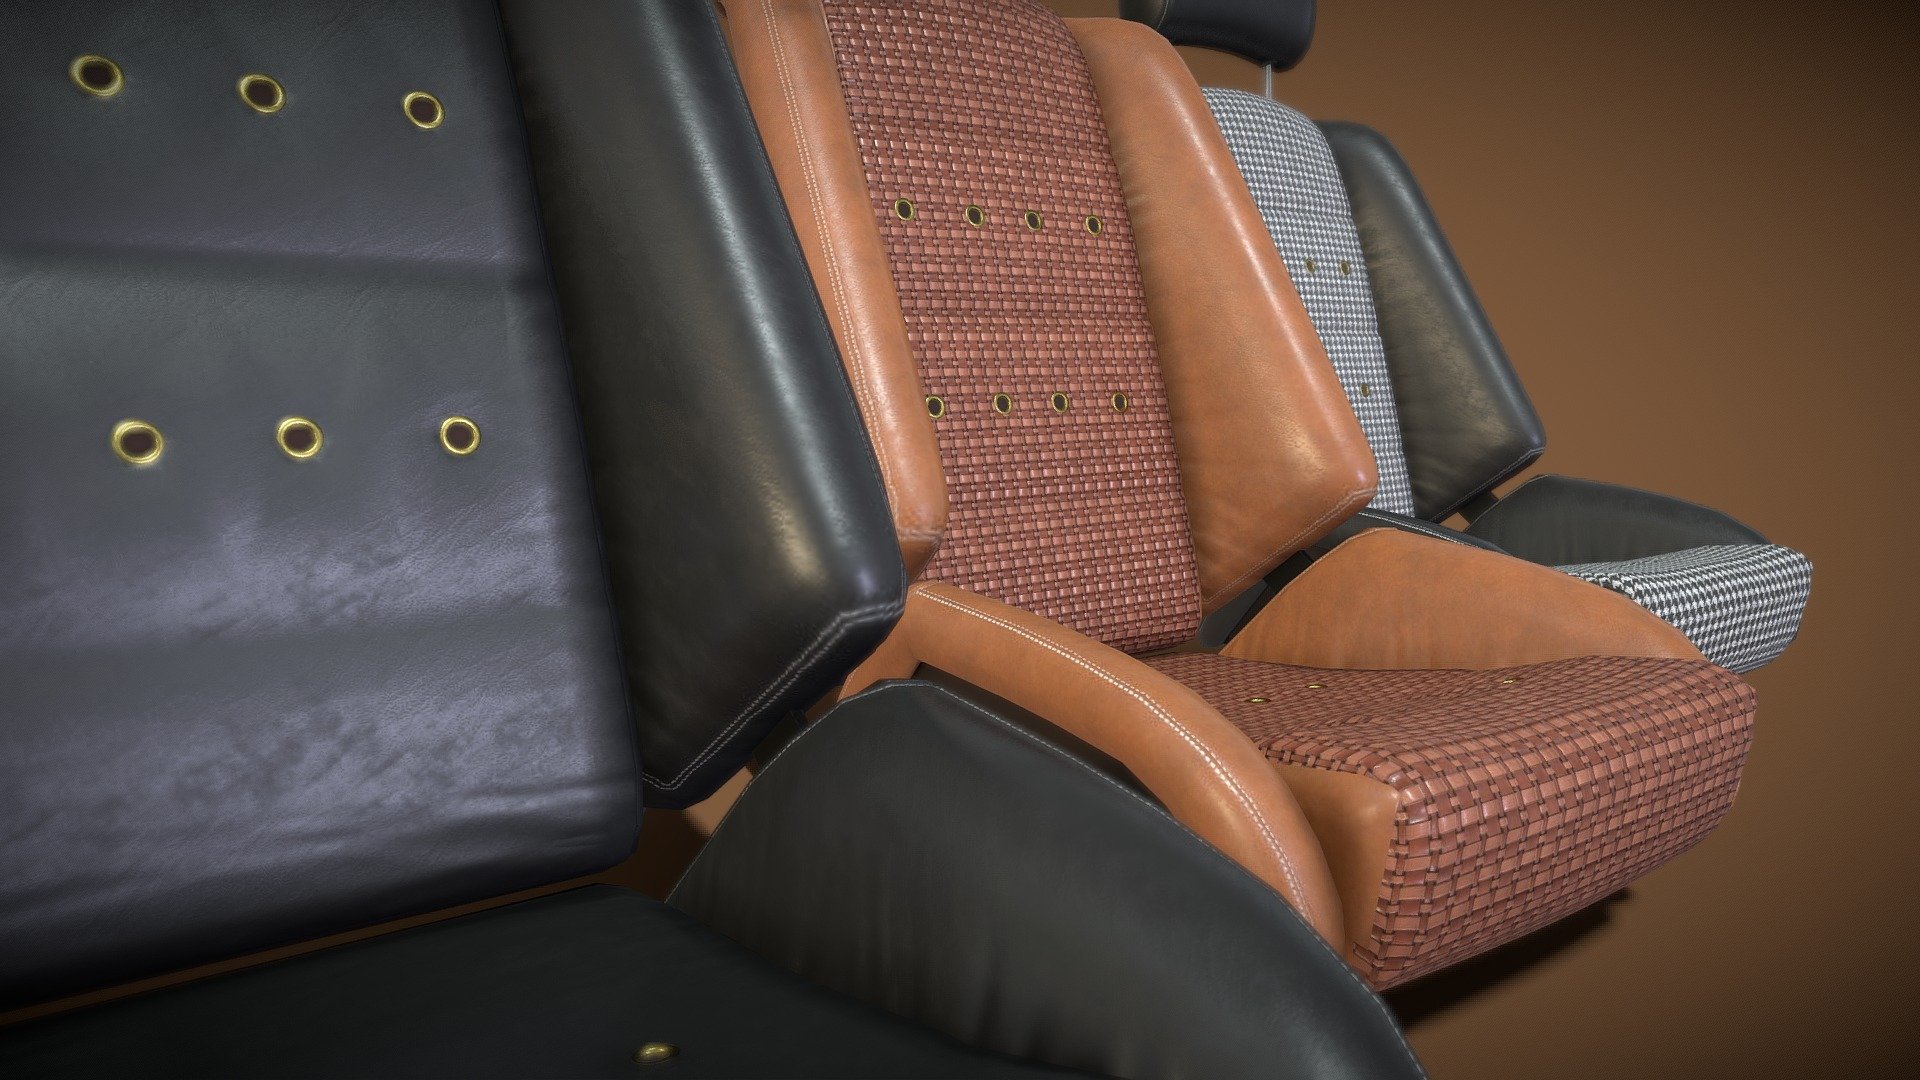 The GTS Classic GT sport seats I made for the 911SC model. You can of course use it universally where you want.
Midpoly, PBR, short animation to show the simple headrest rig 3d model